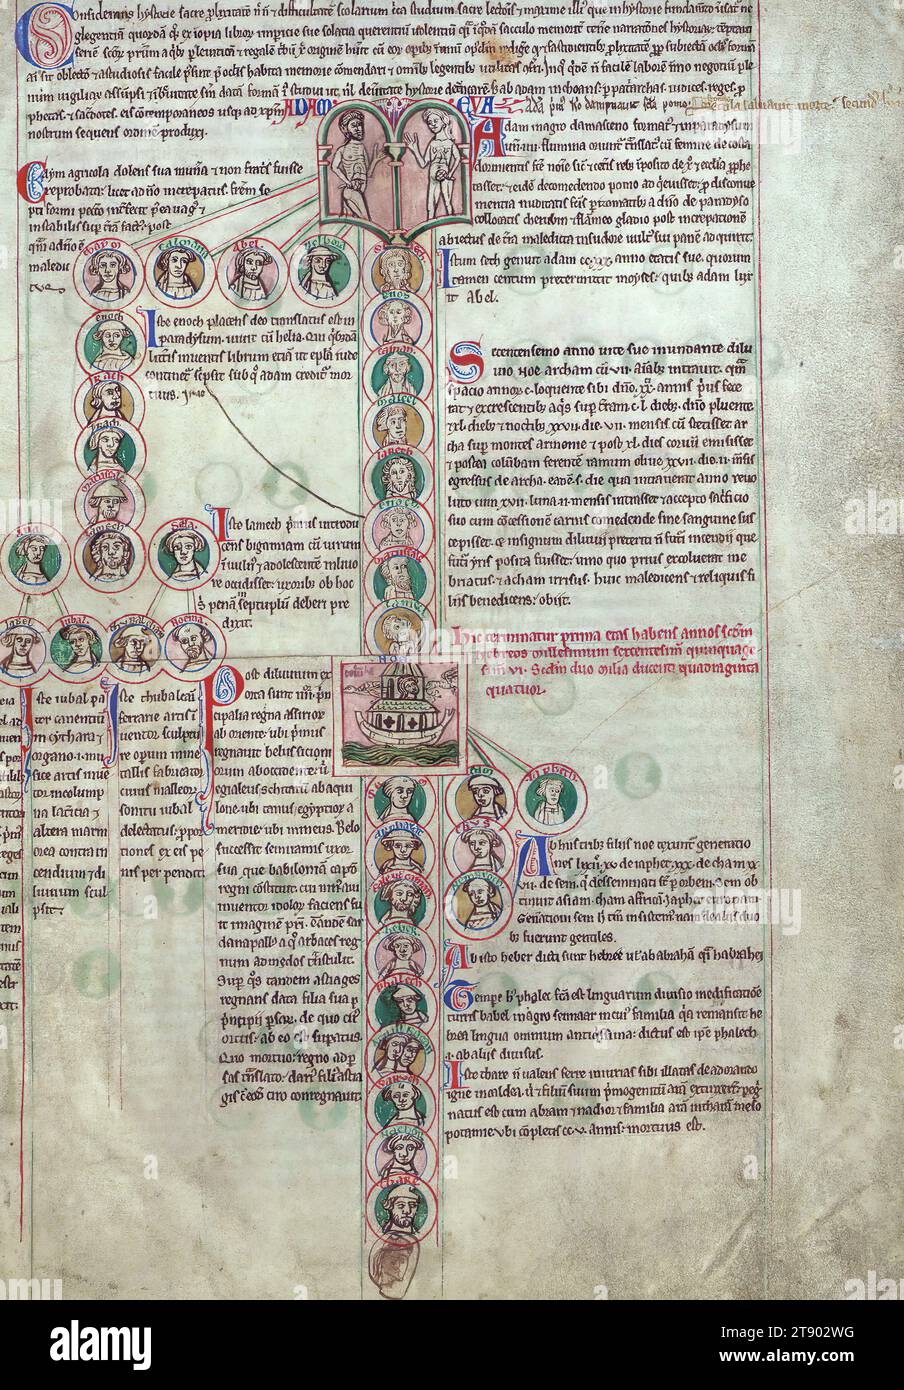 Peter of Poitier's Historical Genealogy of Christ, Genealogy of Christ from Adam to Thare, with Adam and Eve and Noah's Ark, This English manuscript was created in the early thirteenth century, soon after the death of its author, Peter of Poitiers, theologian and Chancellor of the University of Paris from 1193 to 1205. It is an early copy of his text, the Compendium historiae in Genealogia Christi Stock Photo